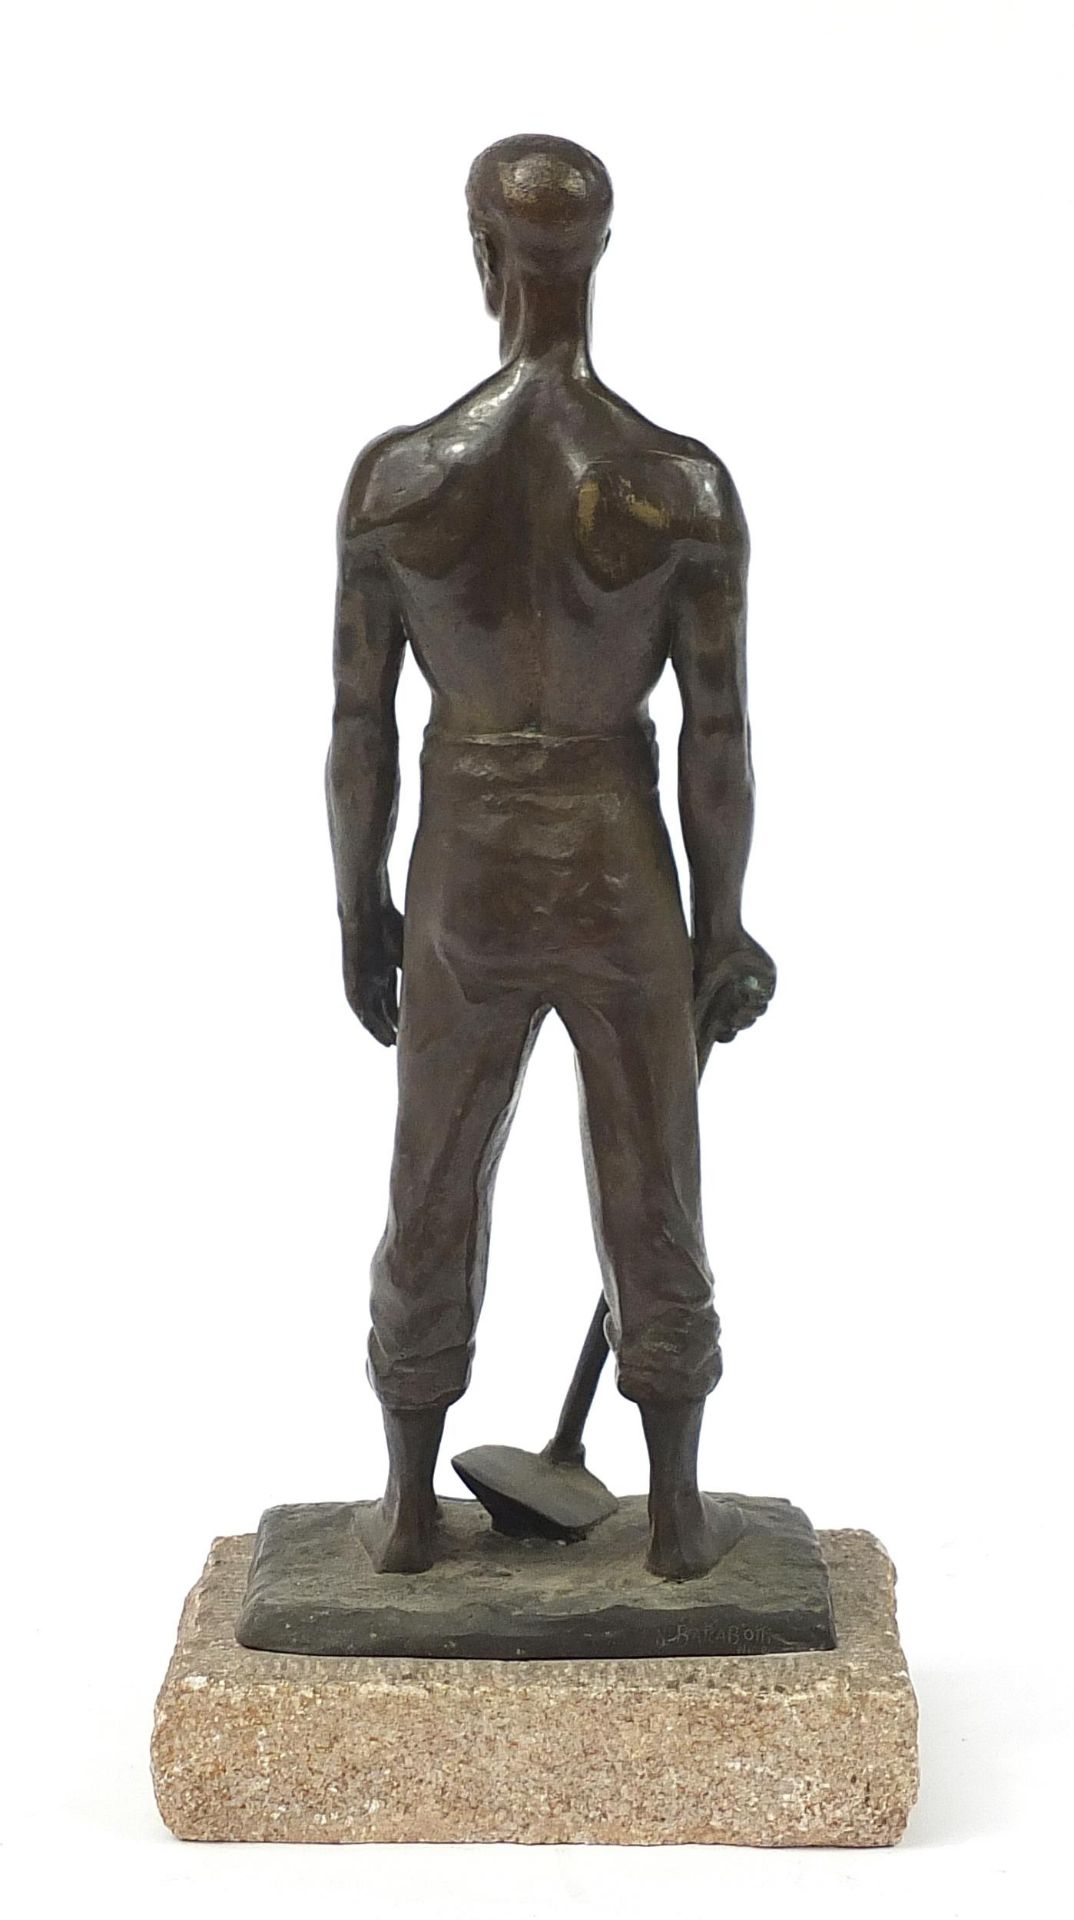 Industrial bronze figure of a workman holding a digging hoe signed N Barabotti, 43.5cm high - Image 3 of 5